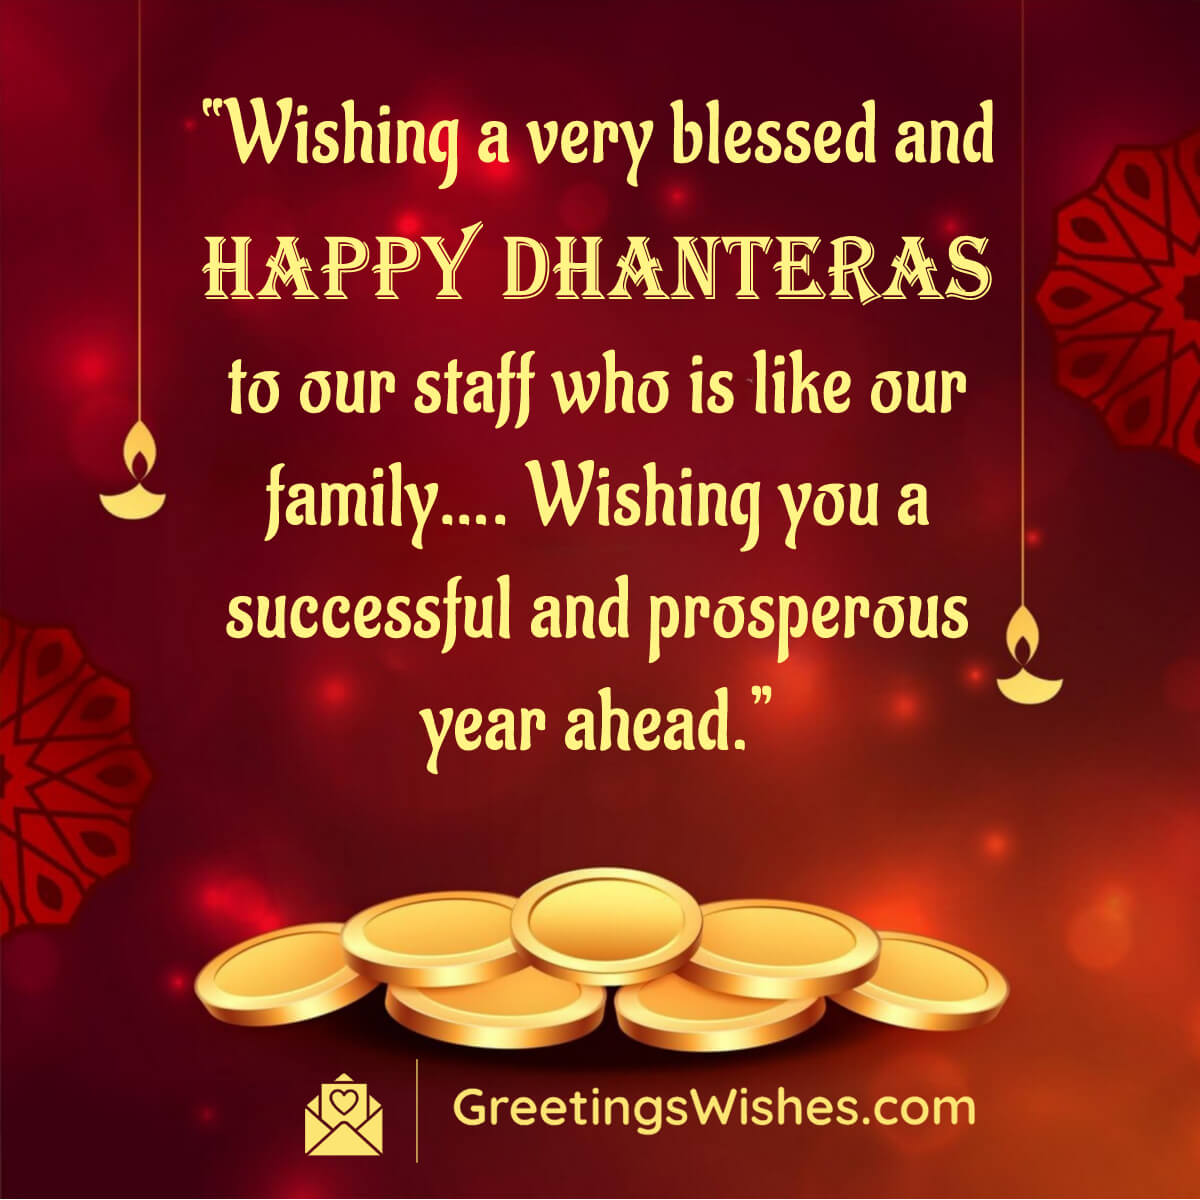 Dhanteras Wishes for Employees